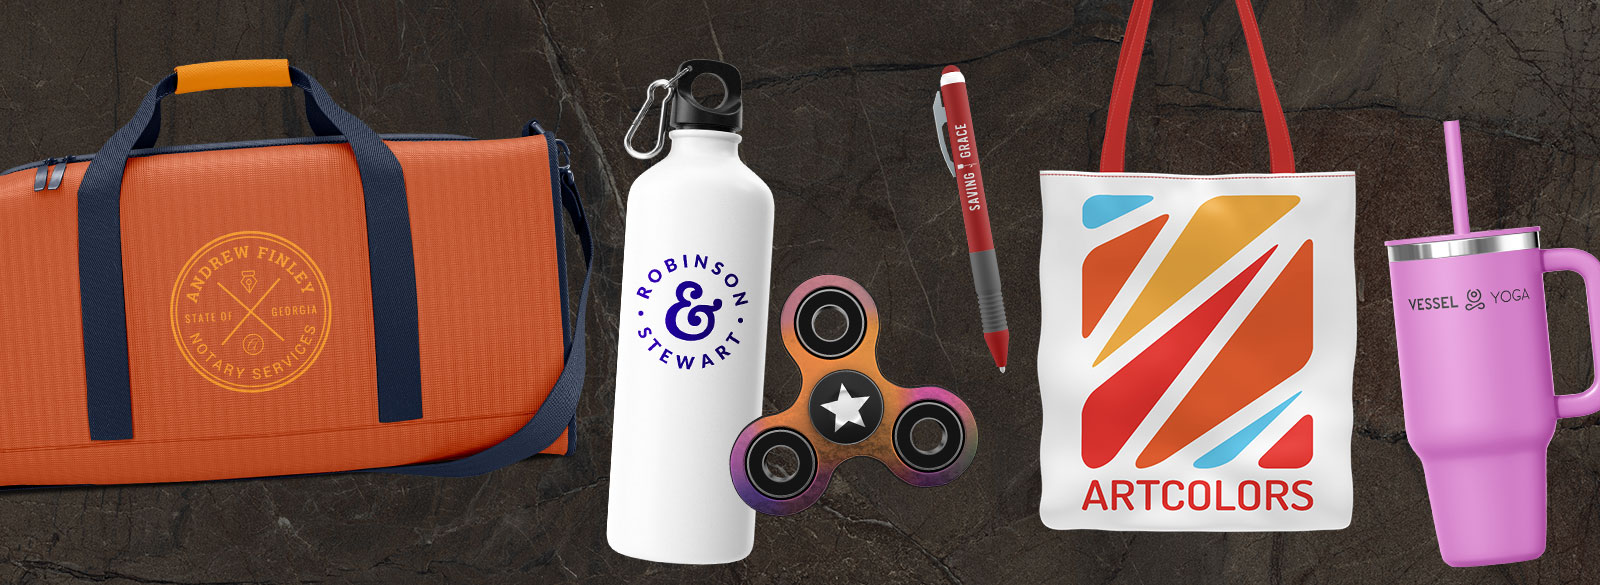 promo products